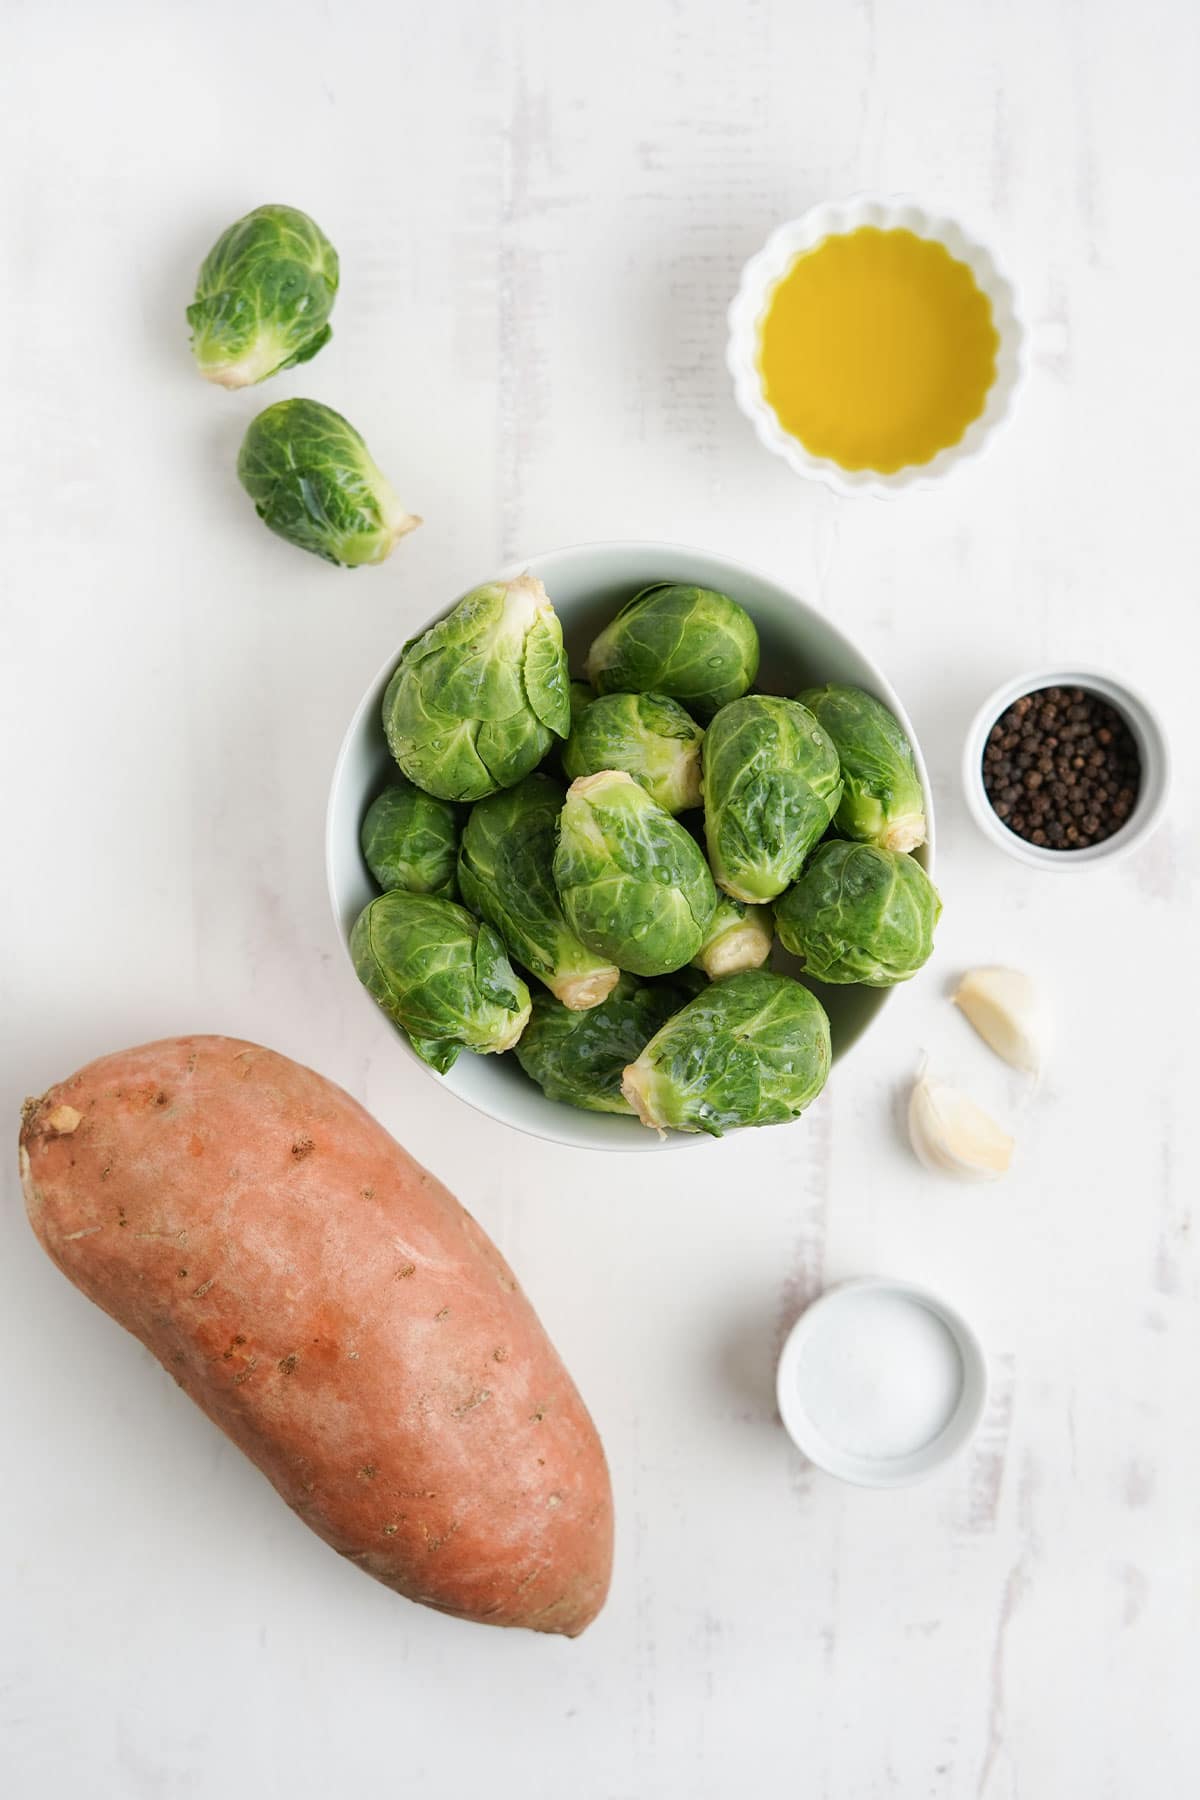 Ingredients to make brussel sprouts and sweet potatoes.